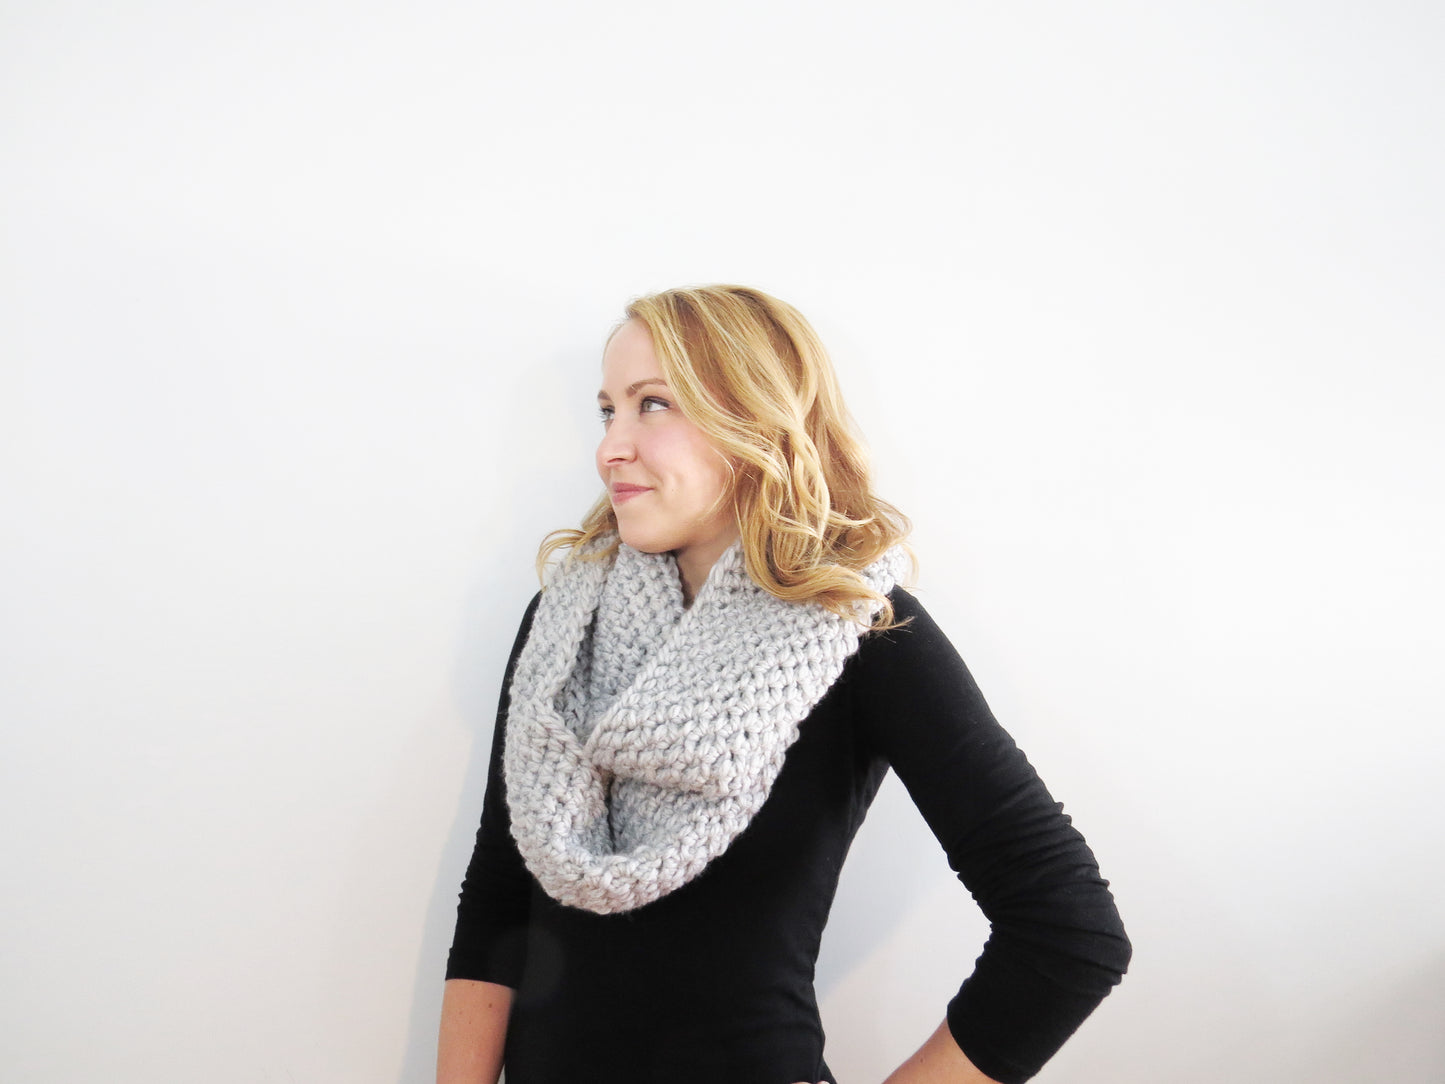 The Essex Infinity Scarf in Light Gray